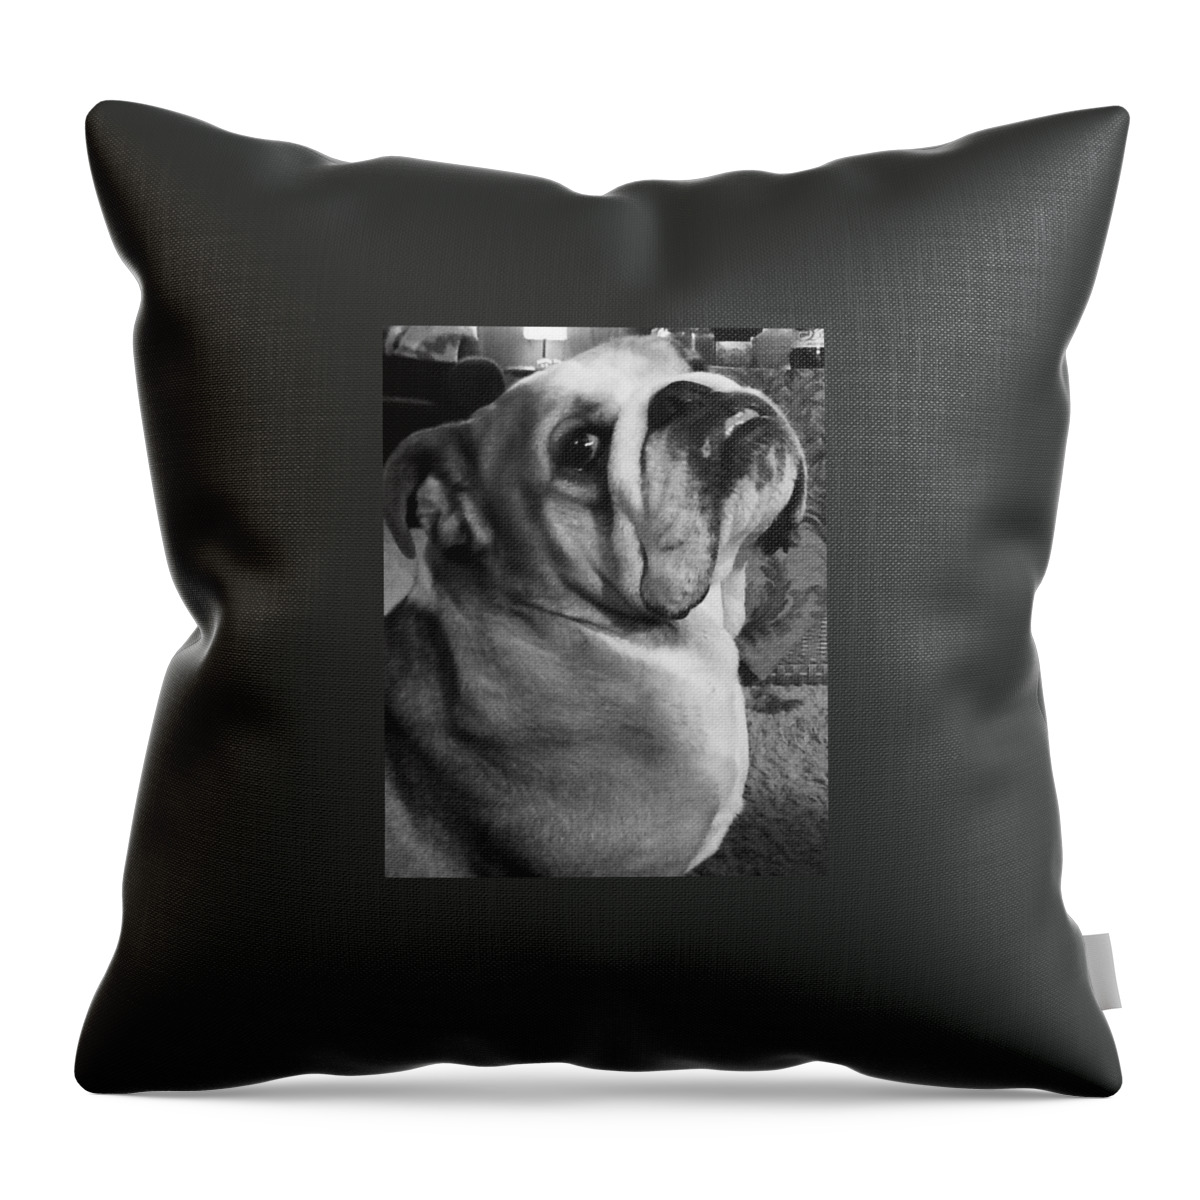 Alfred Hitchcock Bullie Pose Throw Pillow featuring the photograph Alfred Hitchcock Bullie Pose by Kym Backland